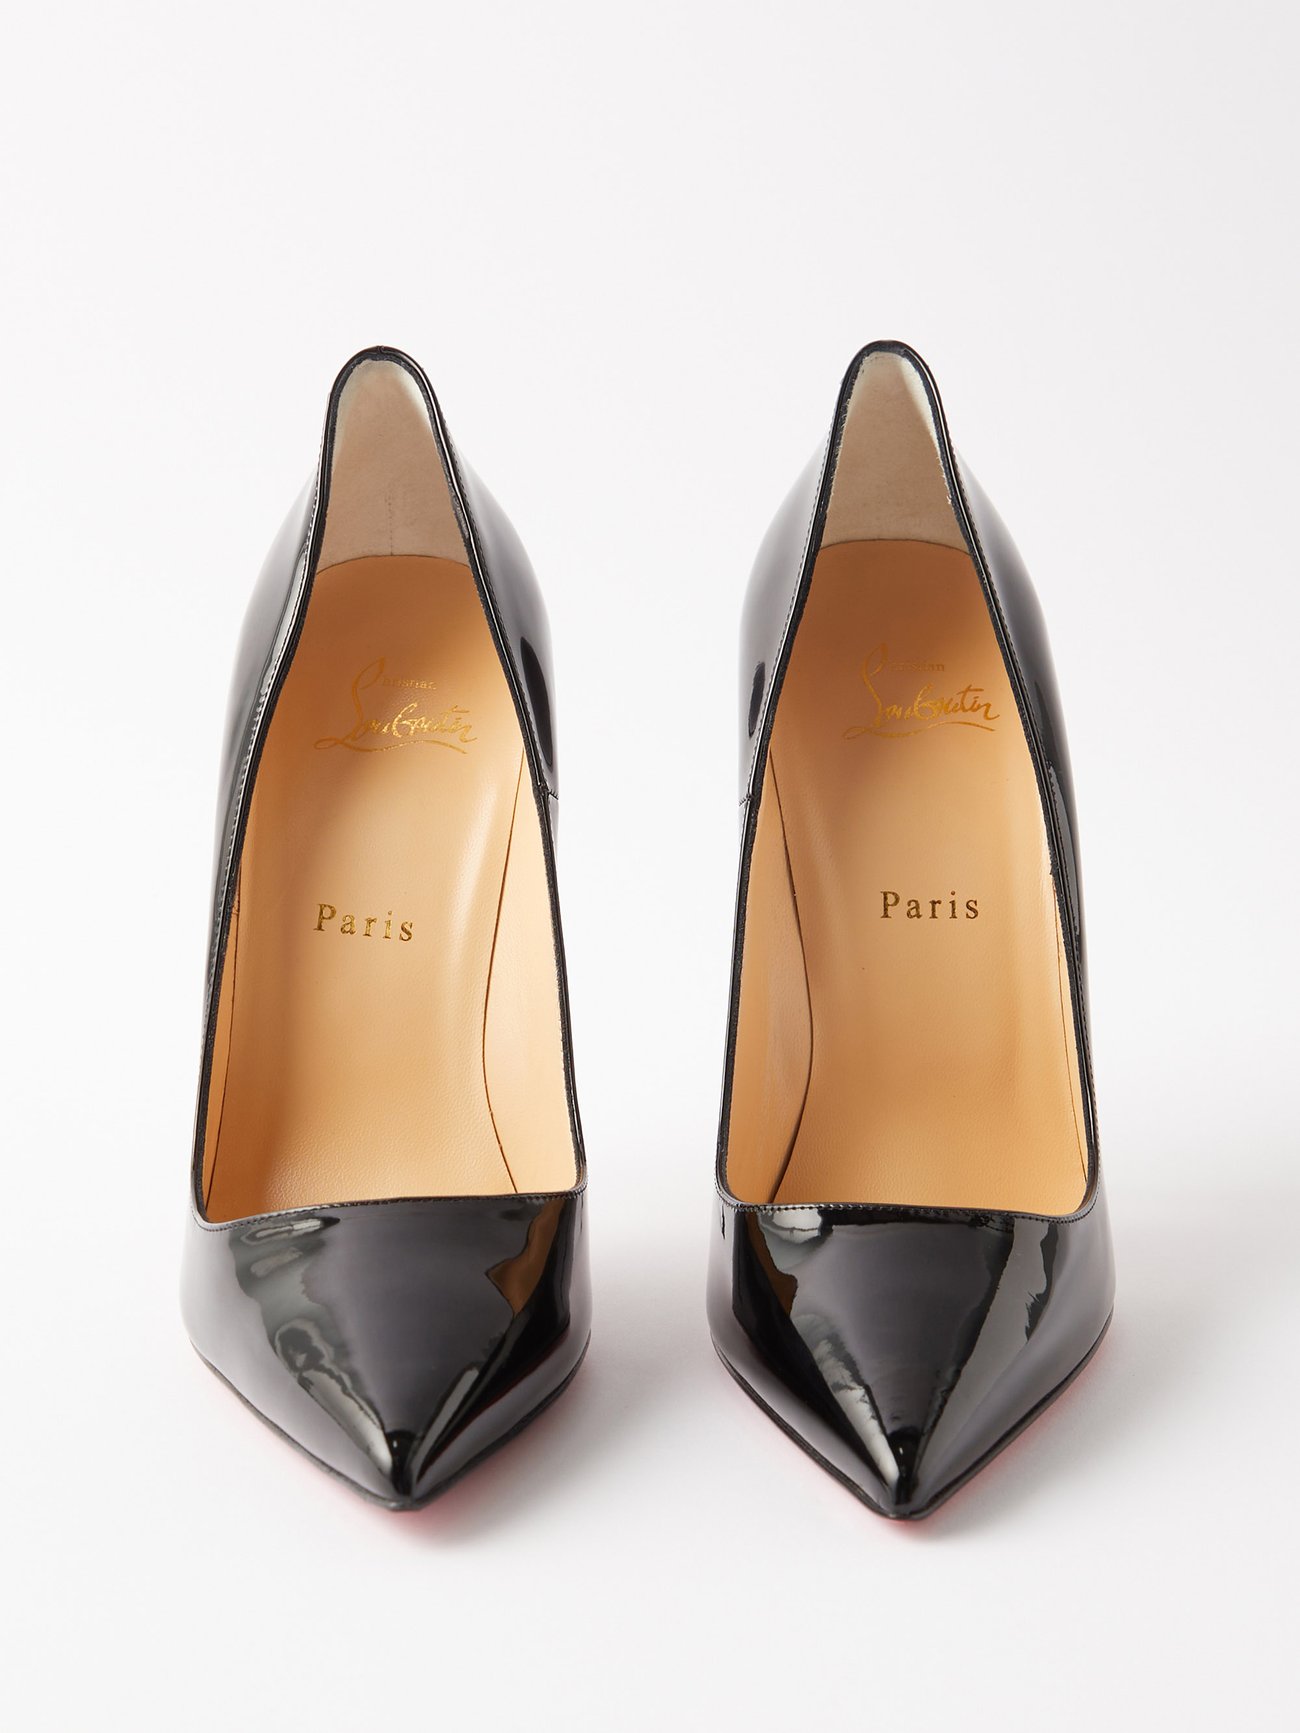 Christian Louboutin So Kate 120 Black Patent Leather Pumps Heels (Size  35.5)